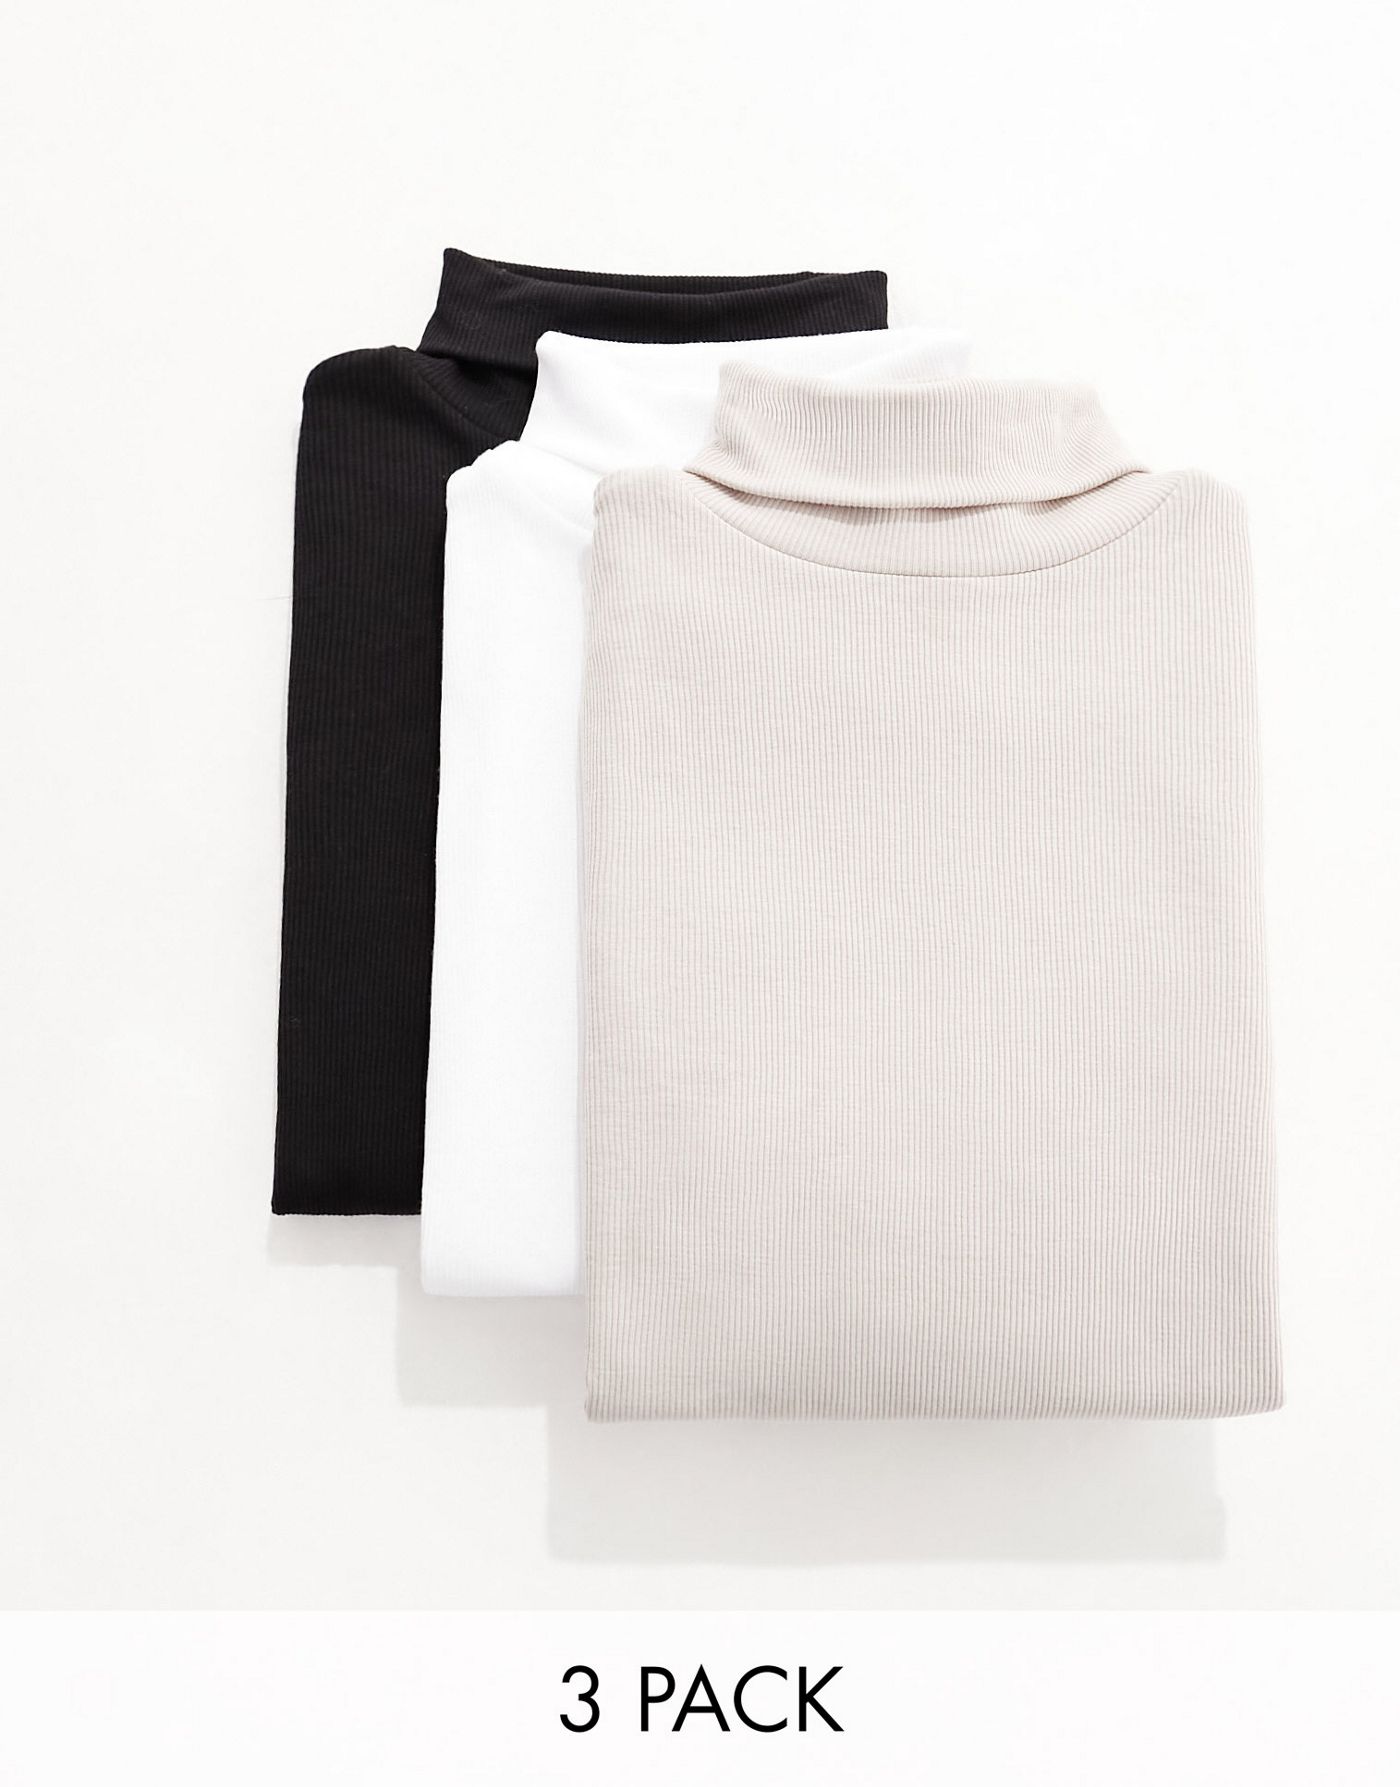 New Look 3 pack ribbed roll neck tops in black, cream and mink